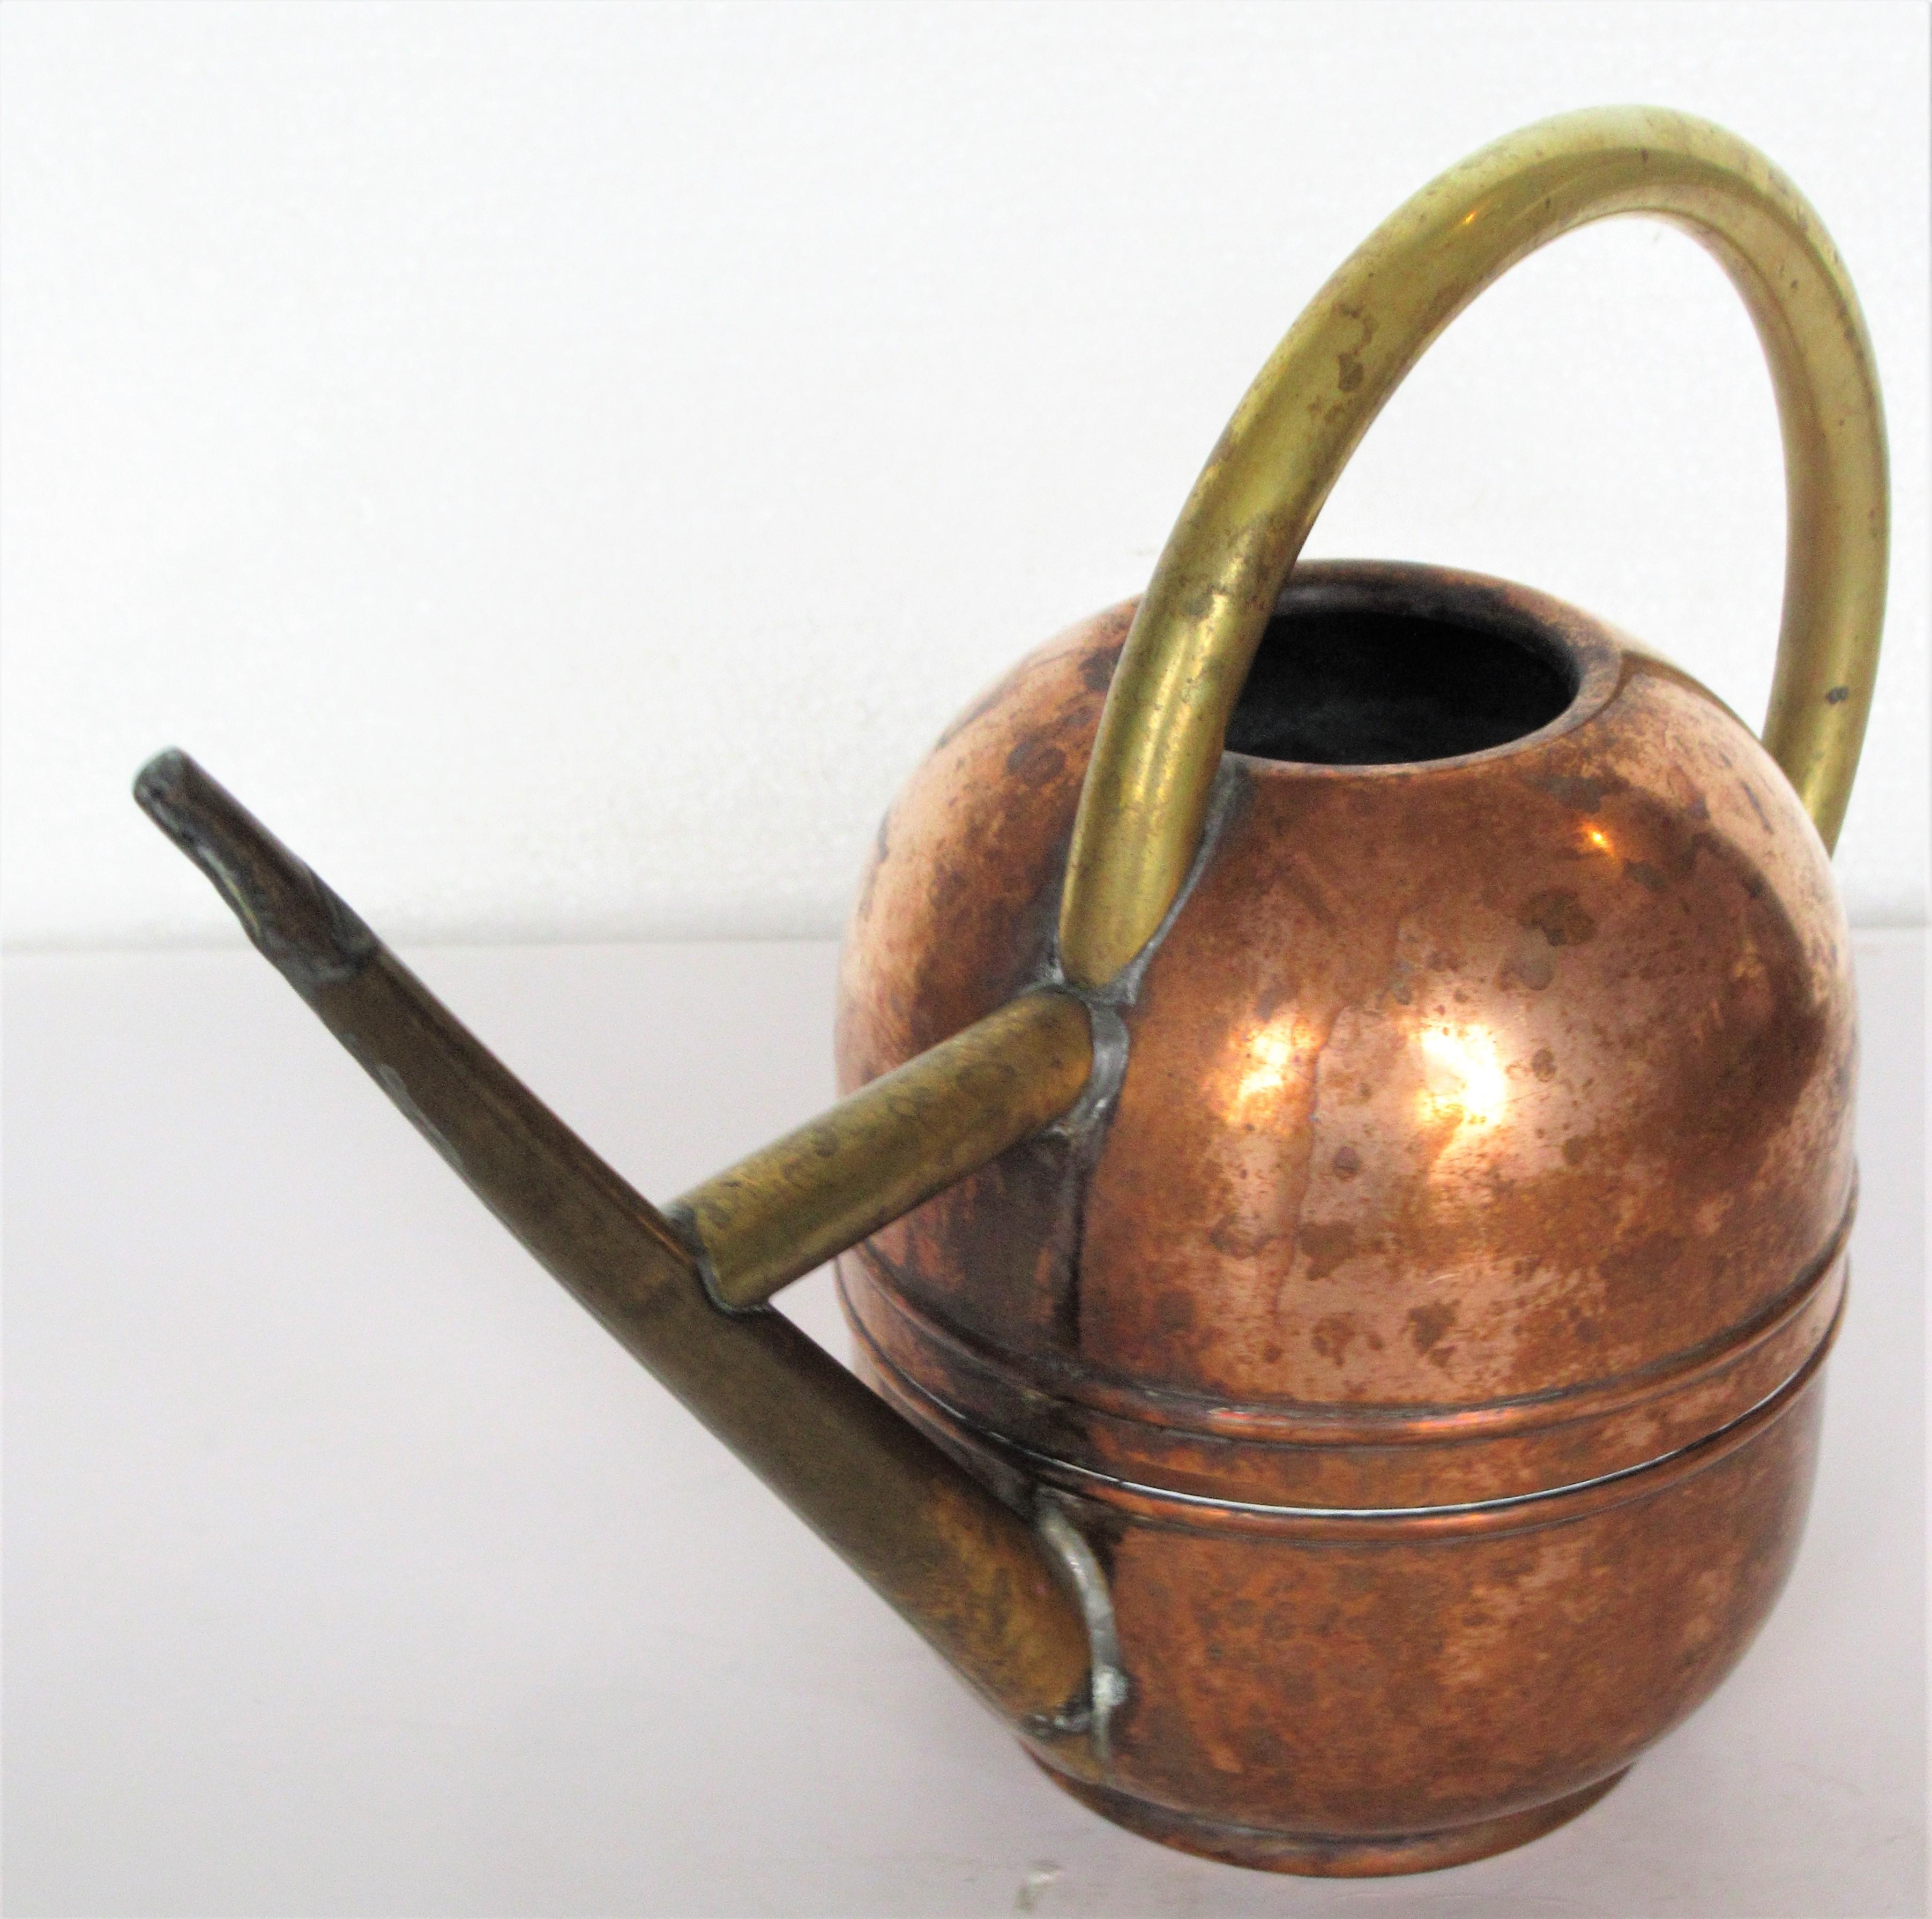  American Art Deco machine age copper and brass watering can designed by Walter Von Nessen for Chase. Stamped Chase with centaur figure on underside, circa 1930. Look at all pictures and read condition report in comment section.